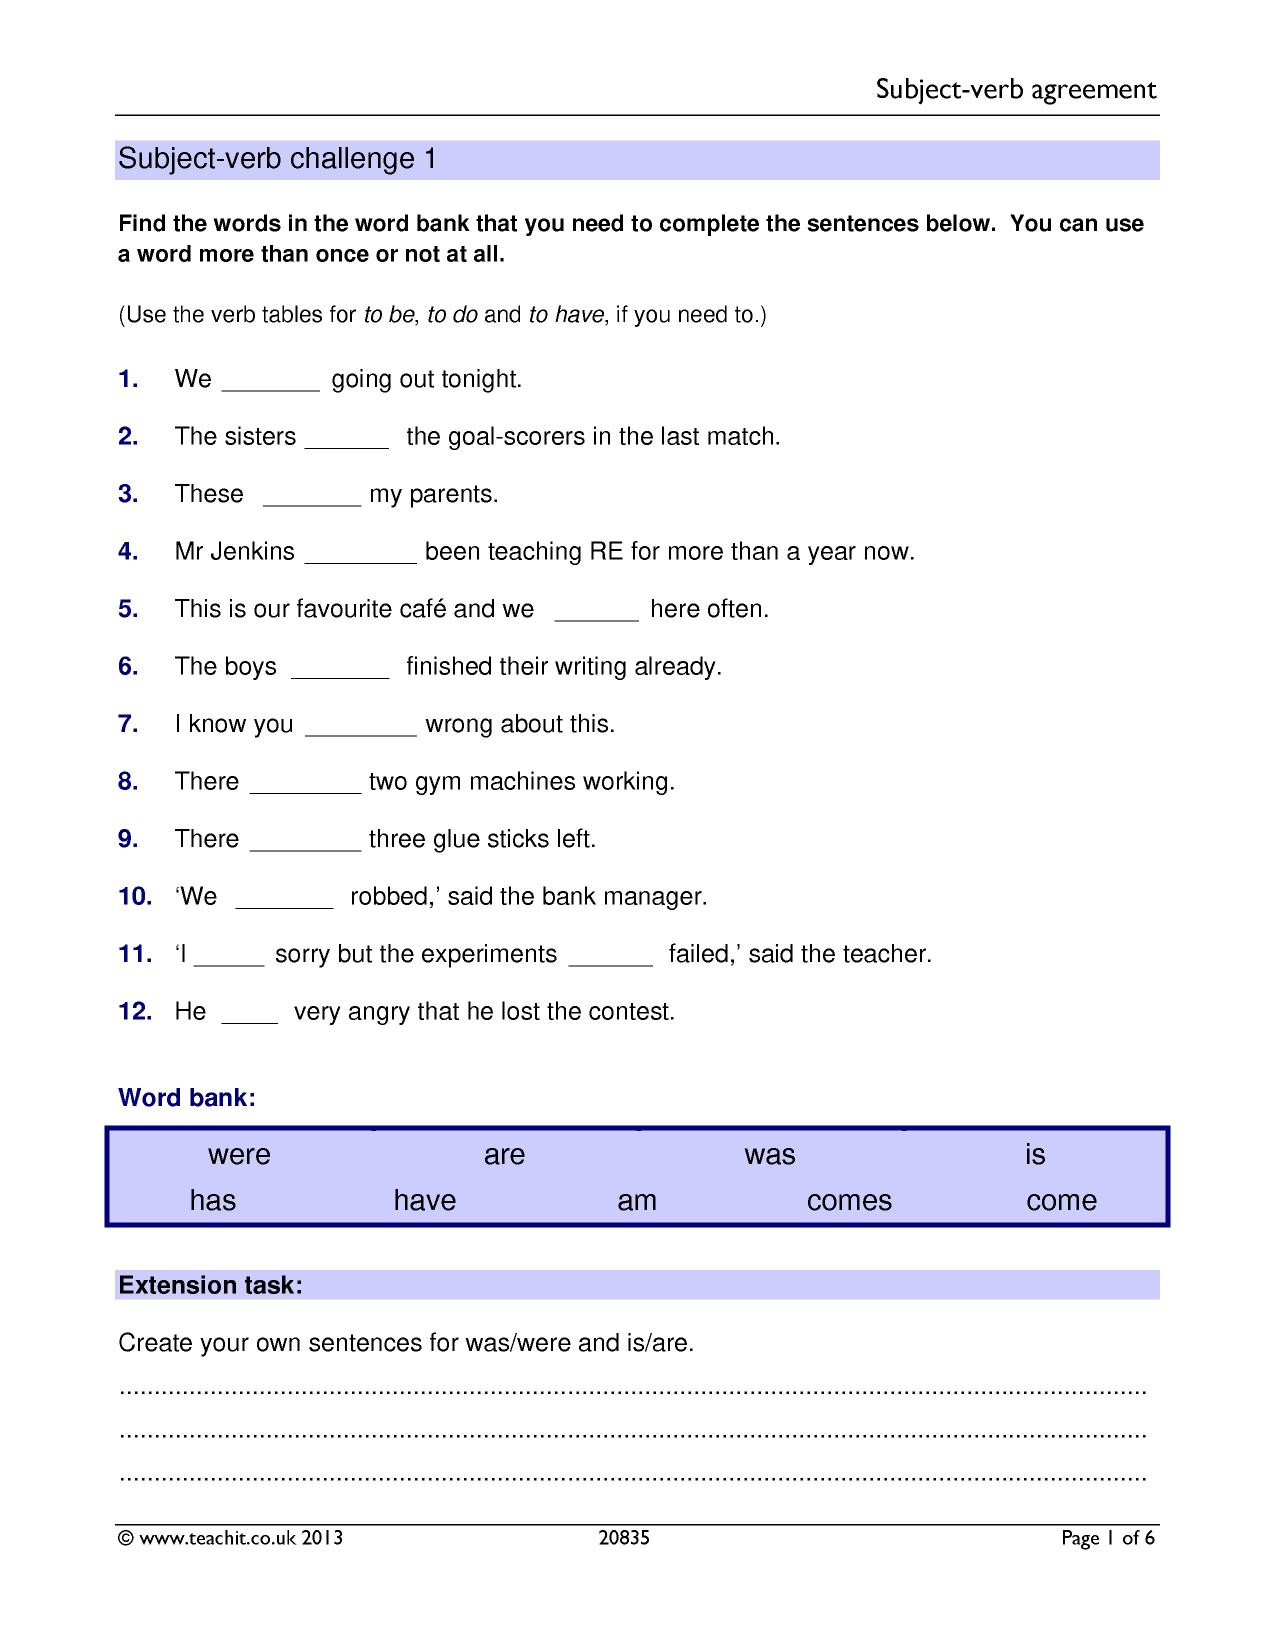 inspired-image-of-subject-verb-agreement-quiz-with-answer-keys